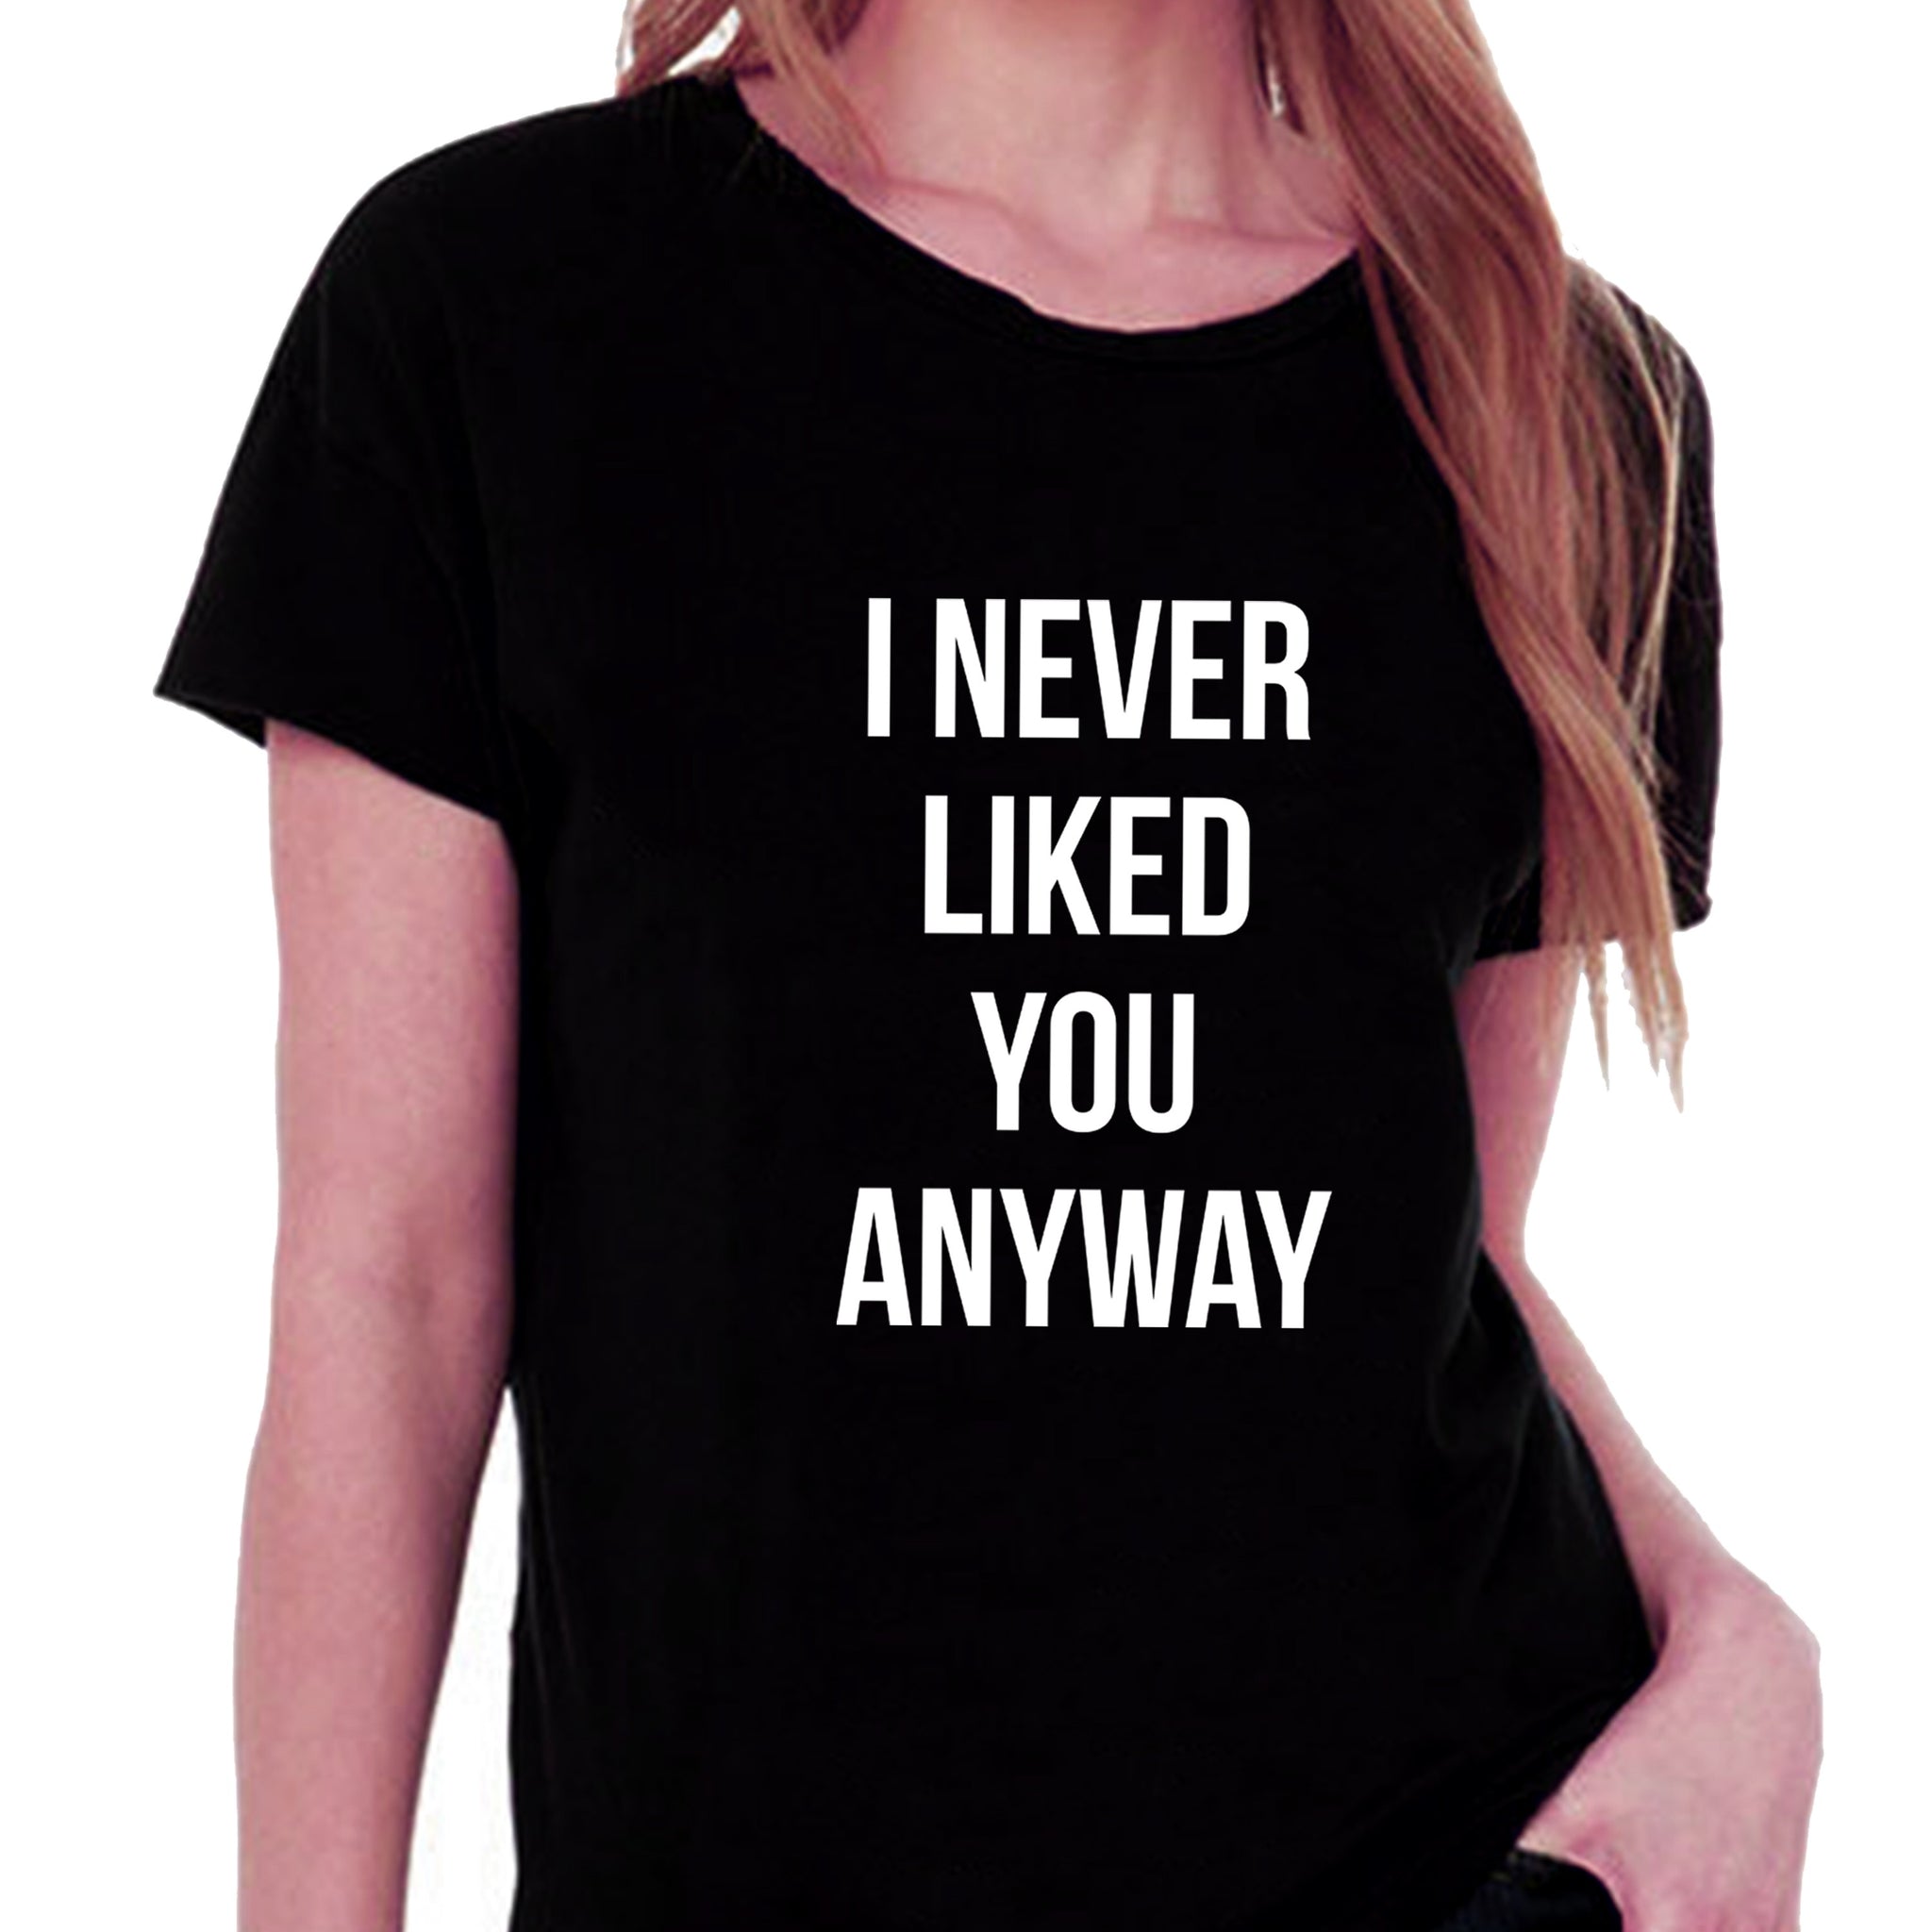 I Never Liked You Anyway T-shirt for Women - Let's Beach